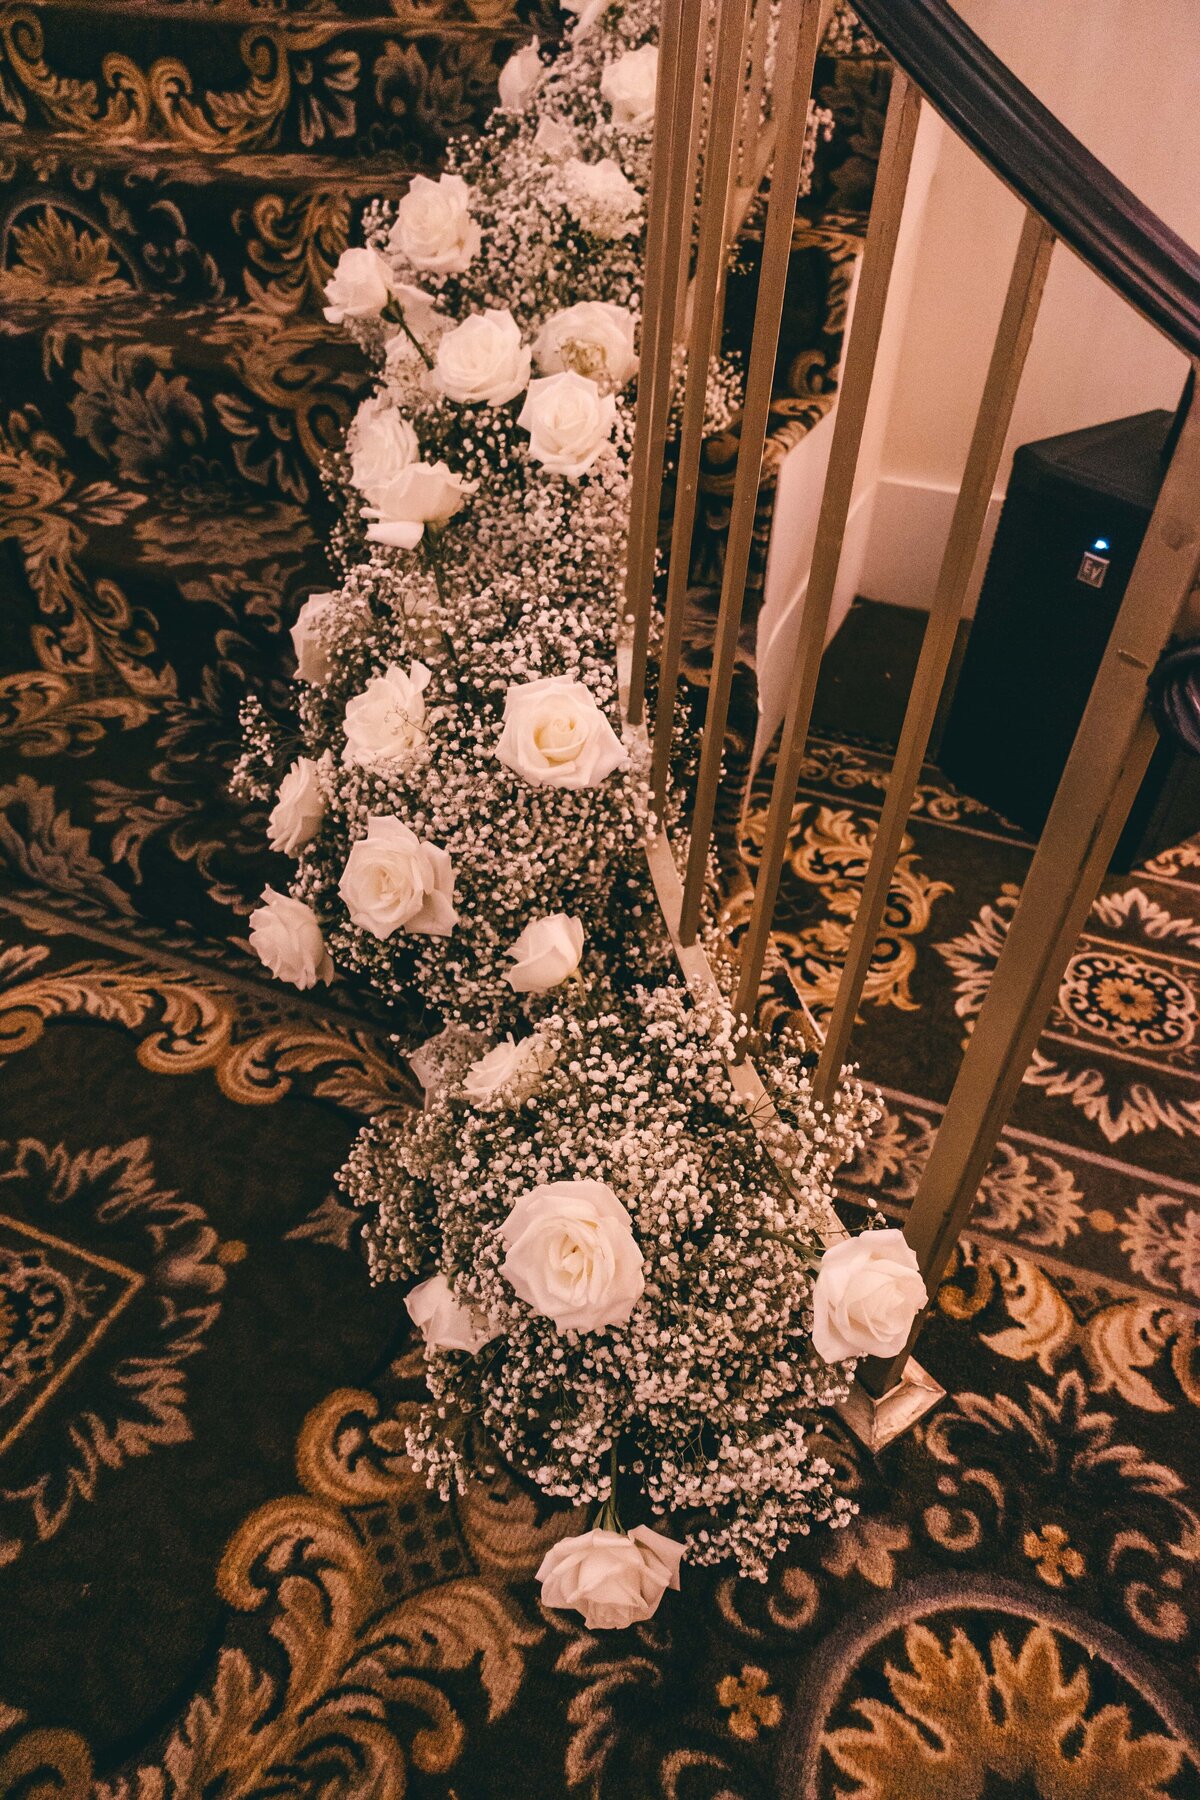 A decorative floral arrangement of white roses and baby's breath along a stair railing, designed by a wedding planner in Des Moines, against a patterned carpet.